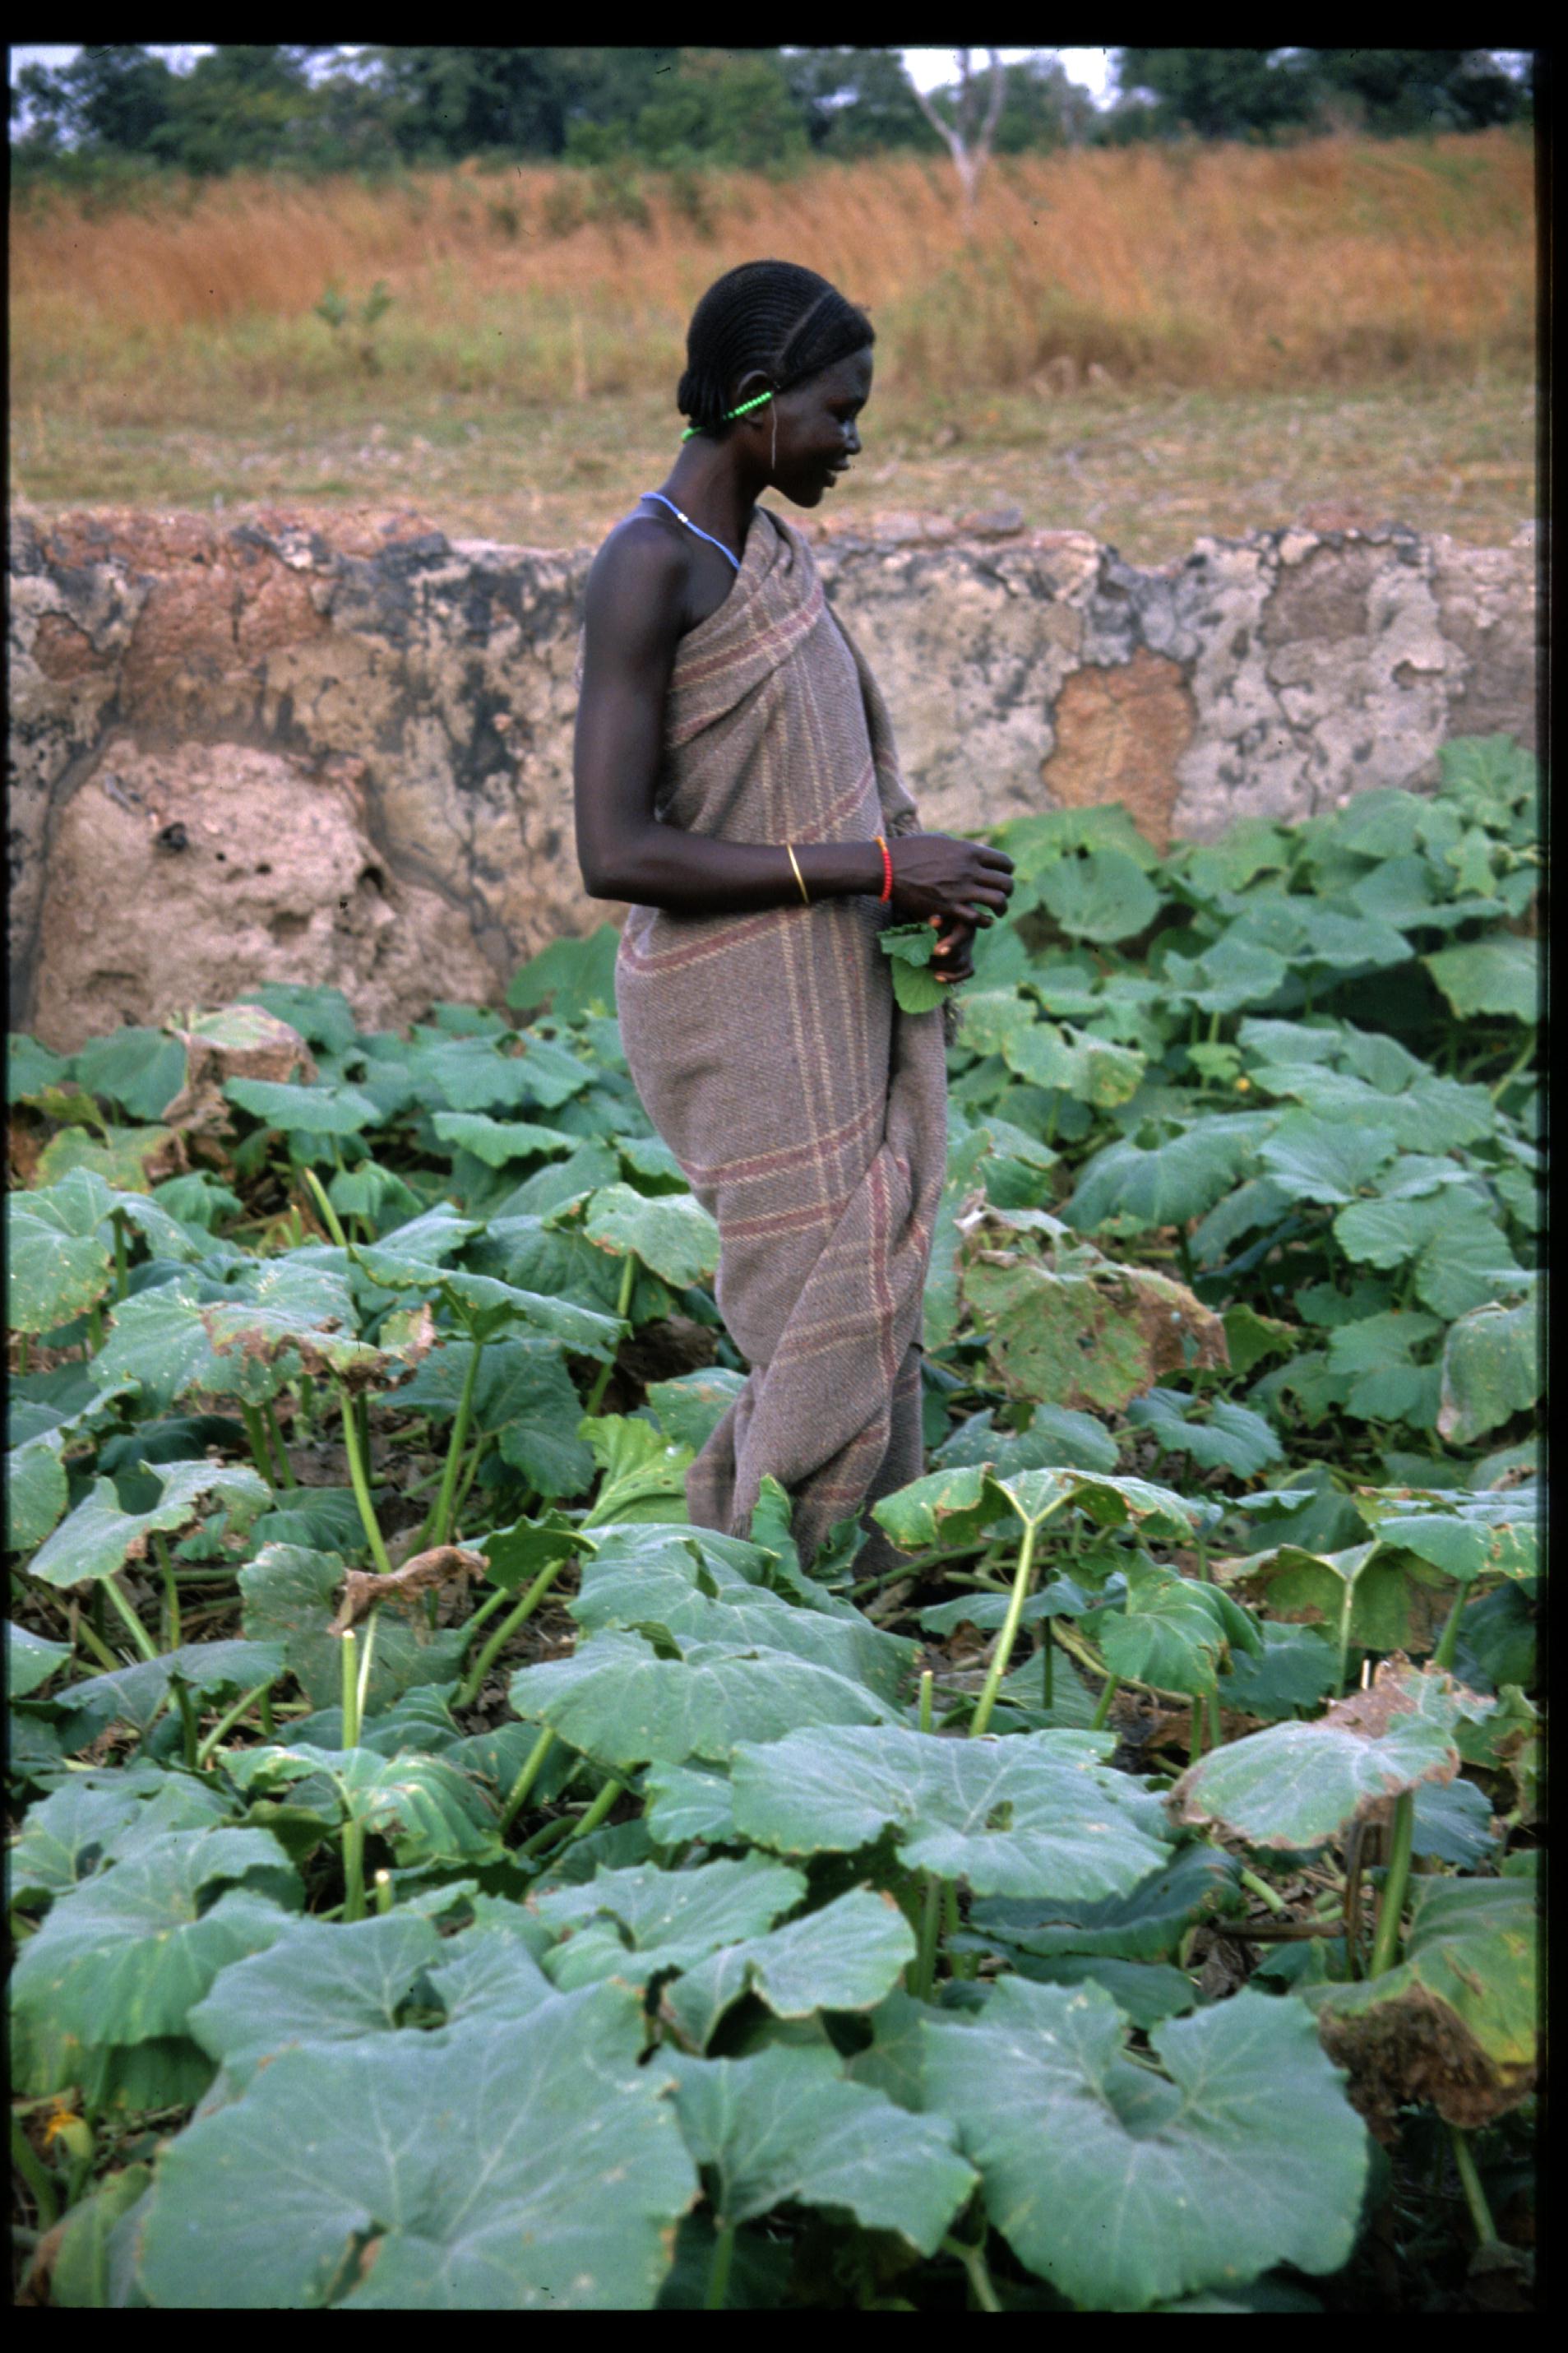  Sudan 1996 (Photo by Tom Haskell) 